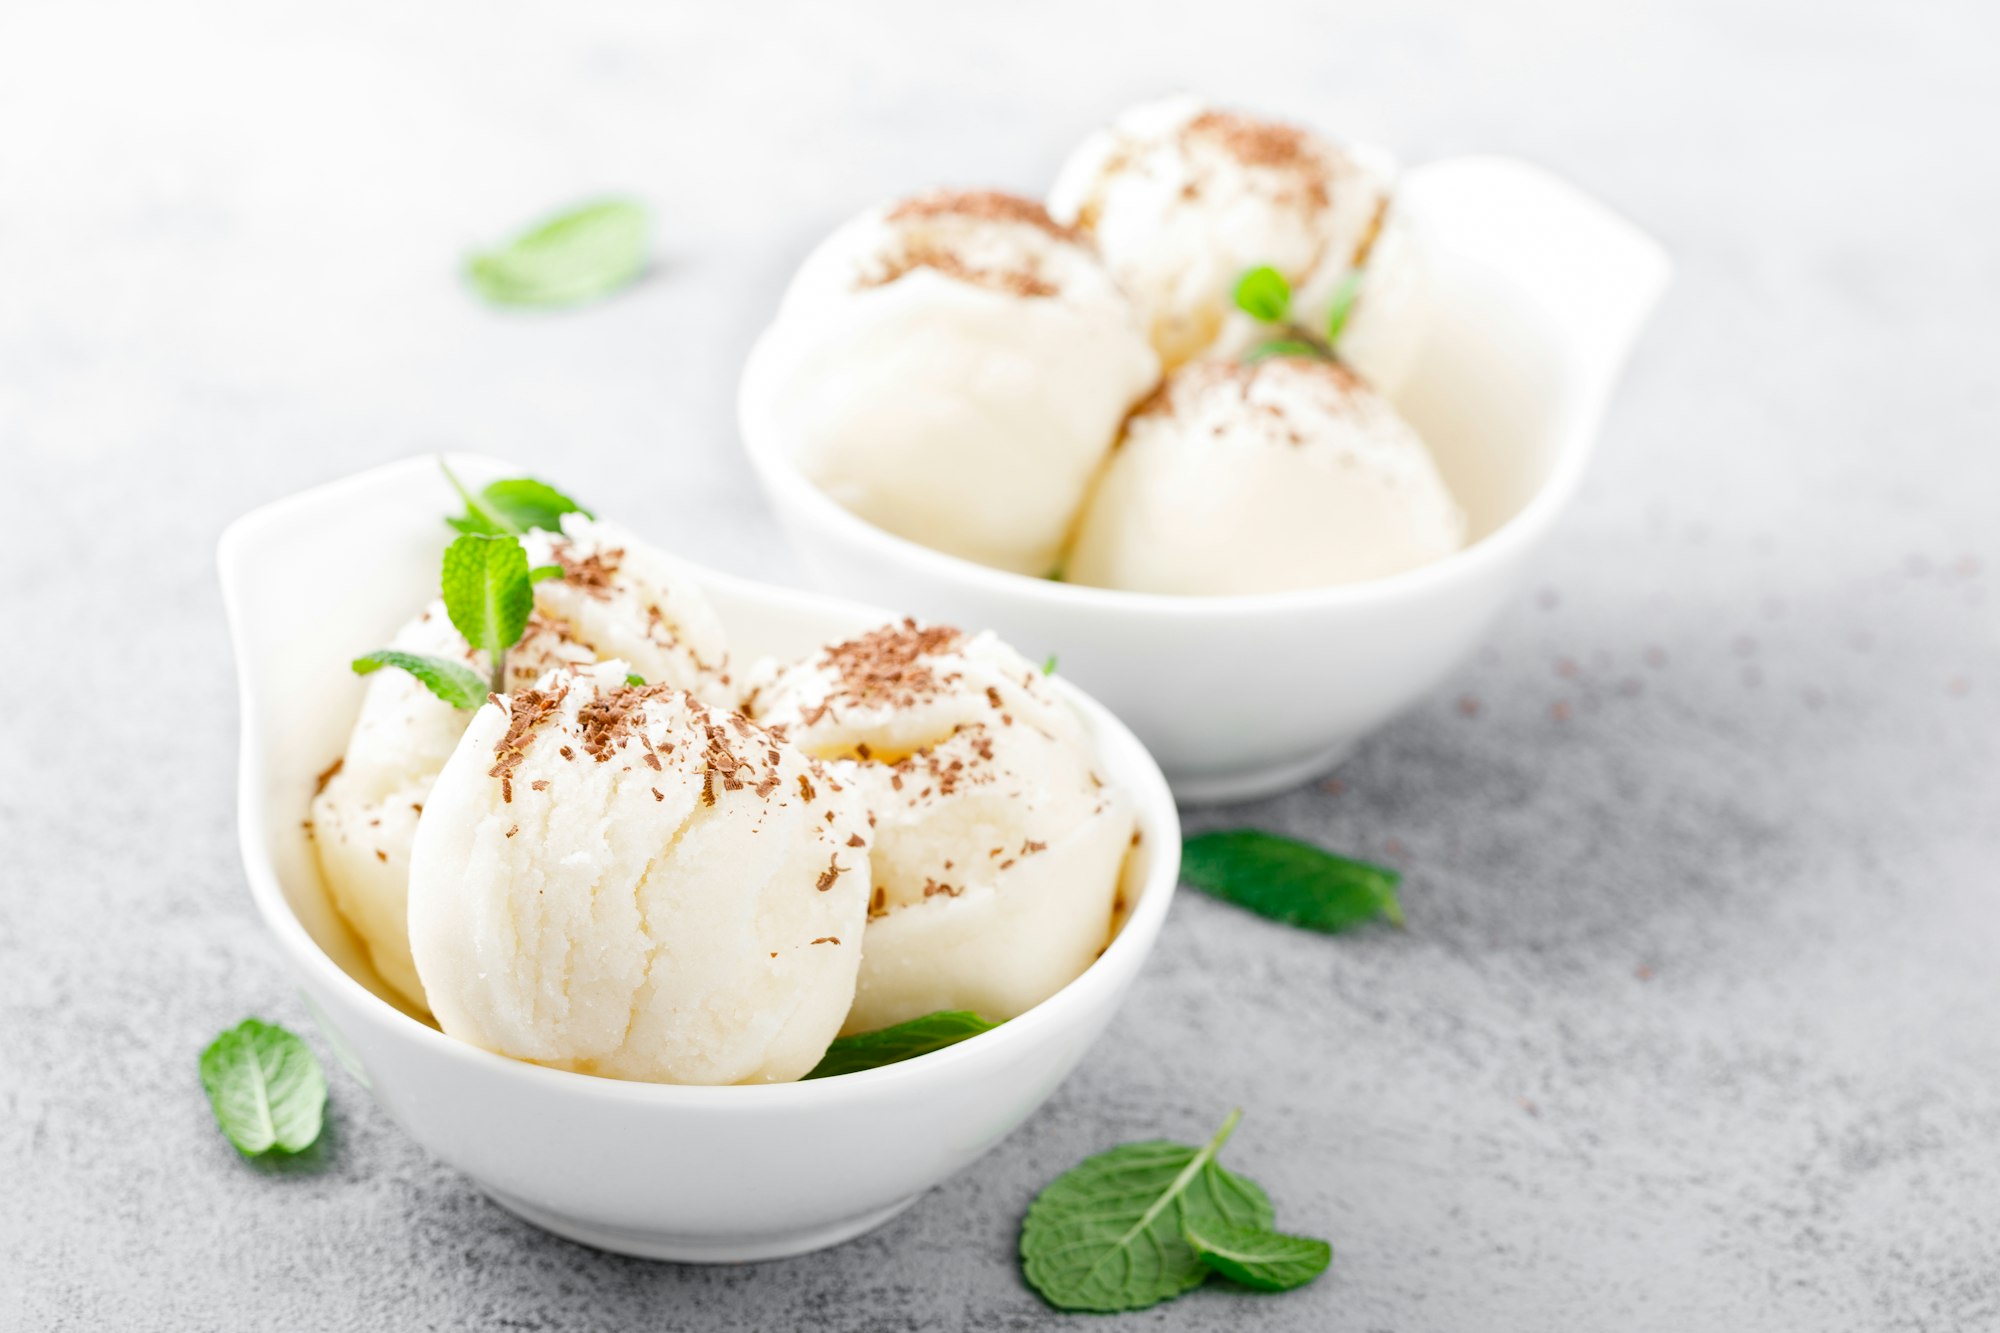 Vanilla ice cream with grated chocolate and mint